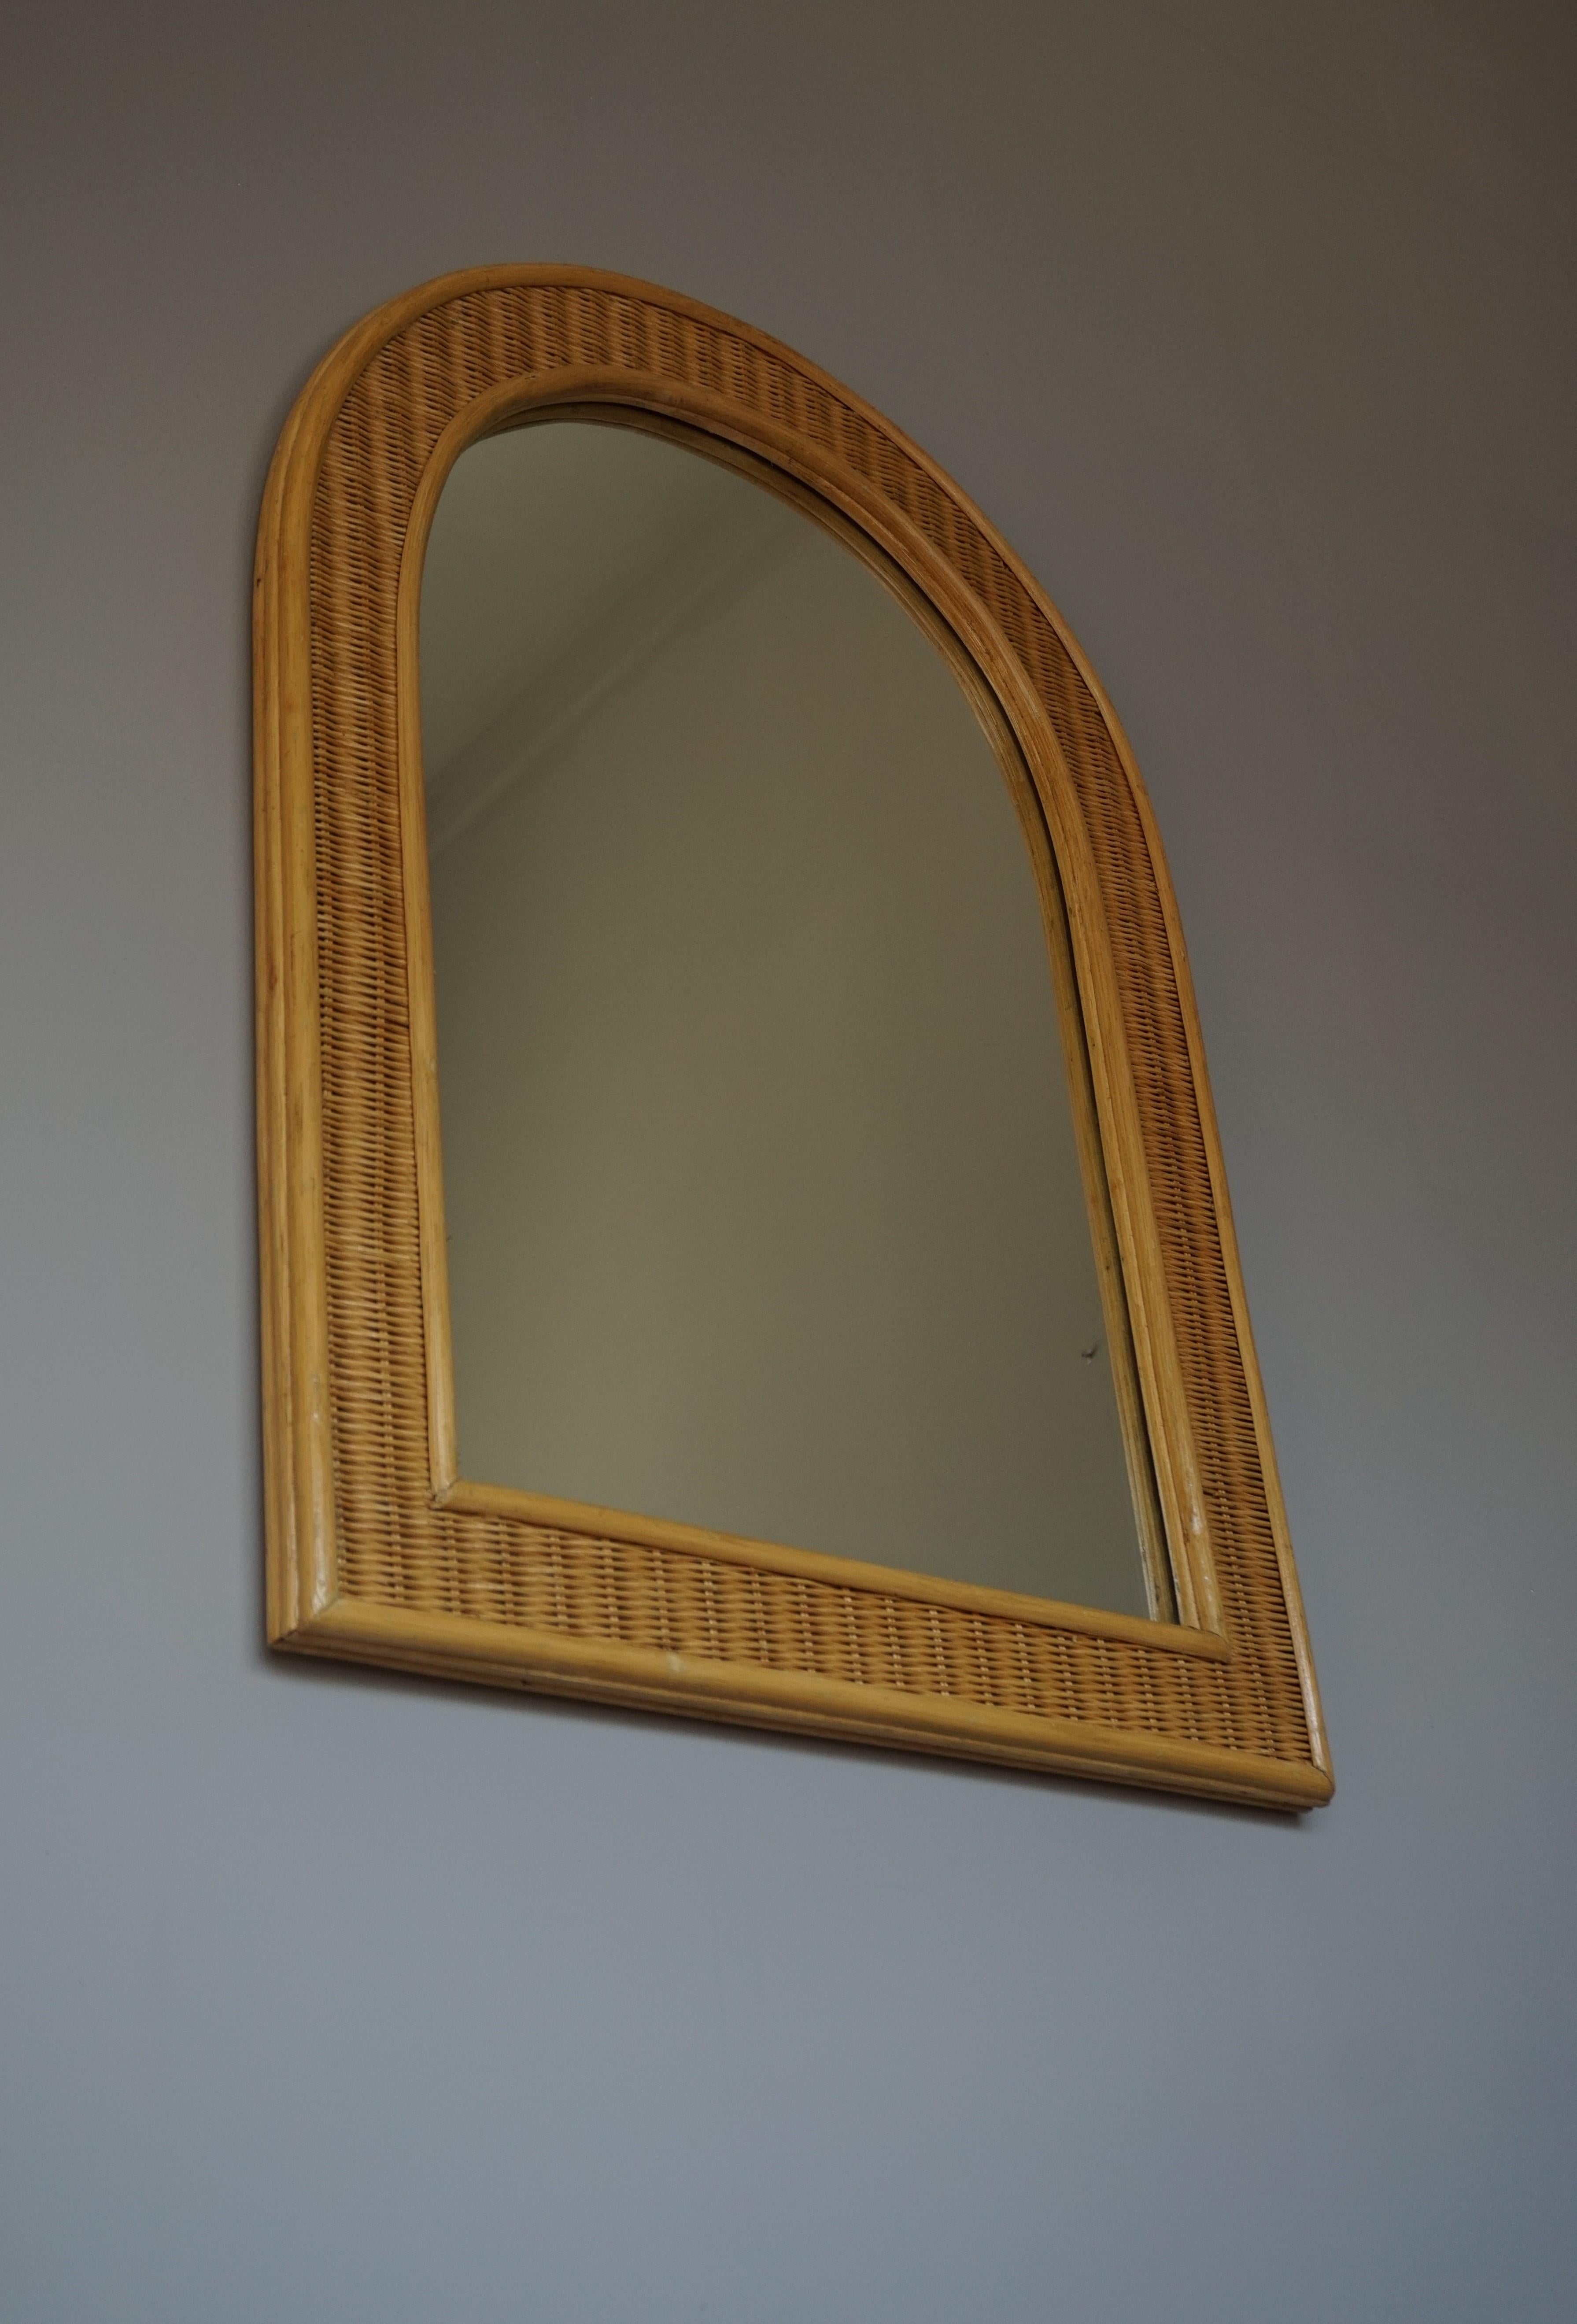 Rare and Handcrafted Midcentury Organic Rattan and Wicker Frame Wall Mirror 1970 For Sale 7